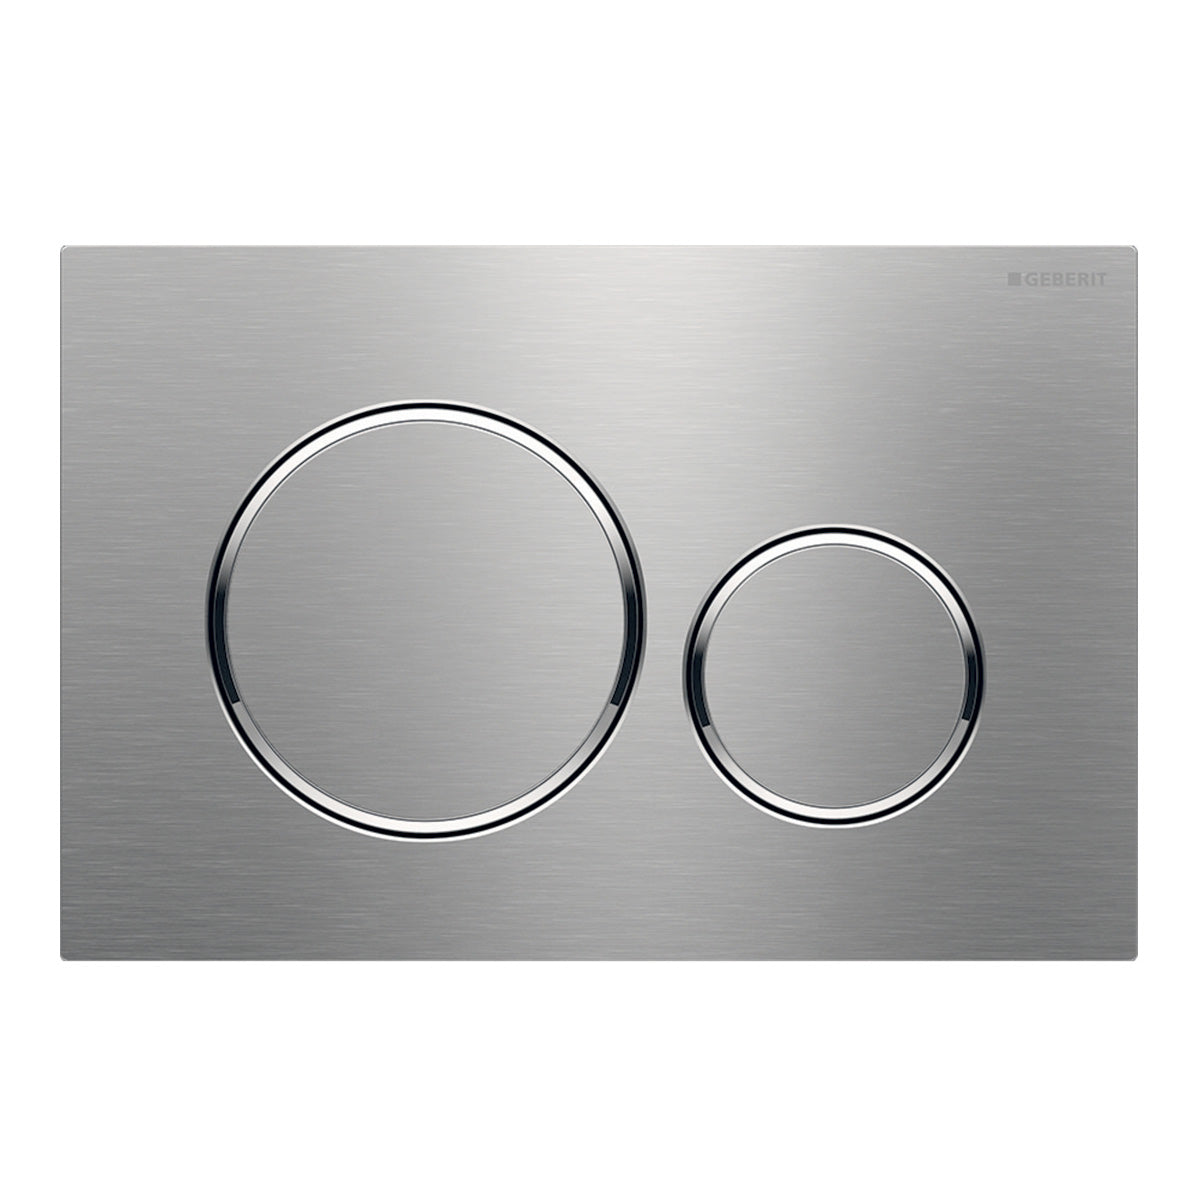 Geberit Sigma20 Dual Flush Button & Access Plate, Brushed Stainless Steel with Chrome Trim Design